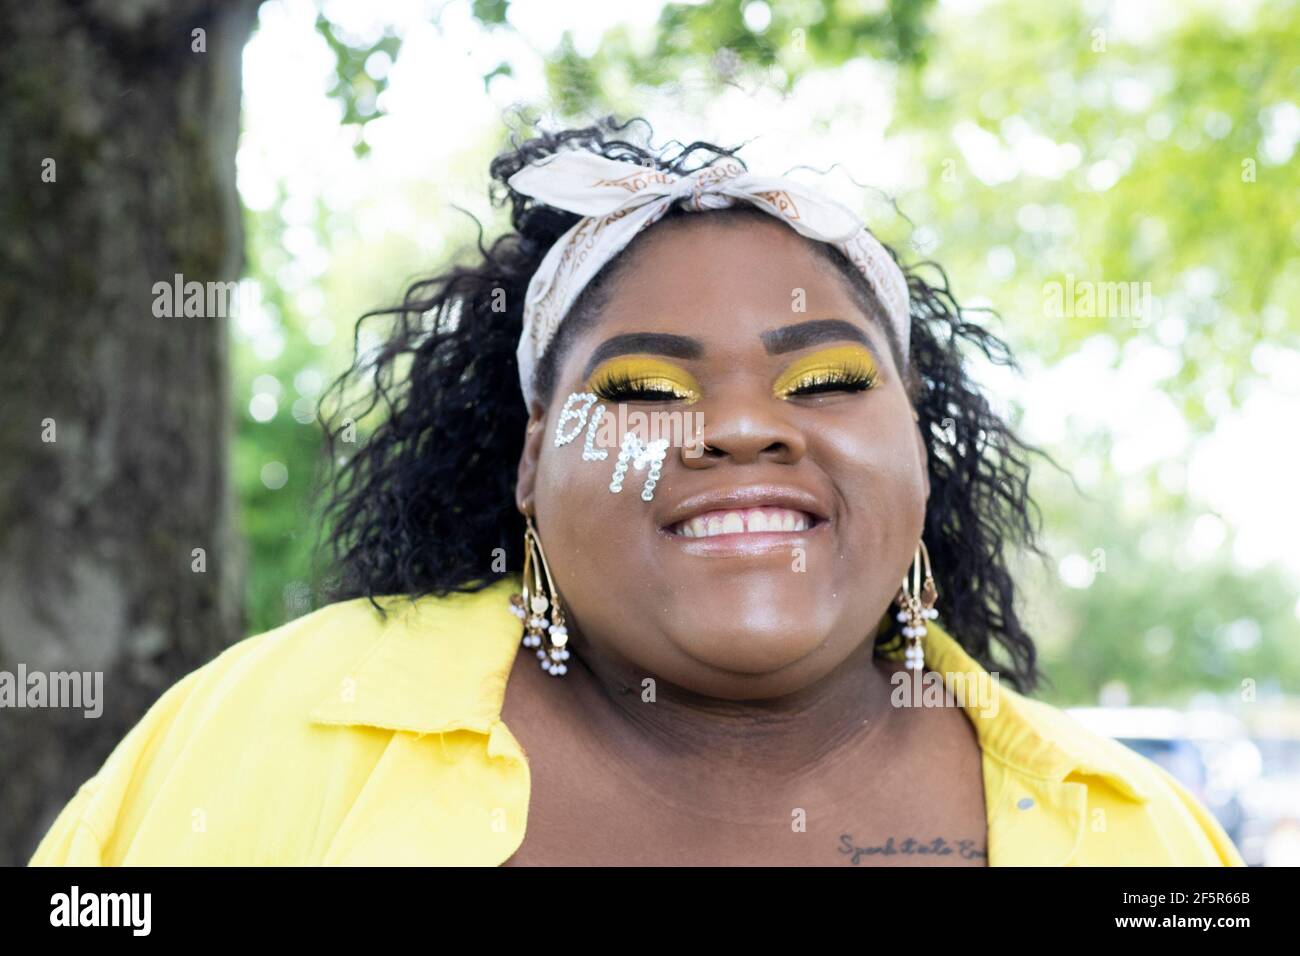 Beautiful, Happy African American Girl Smiling with BLM on cheek and wearing Yellow Stock Photo